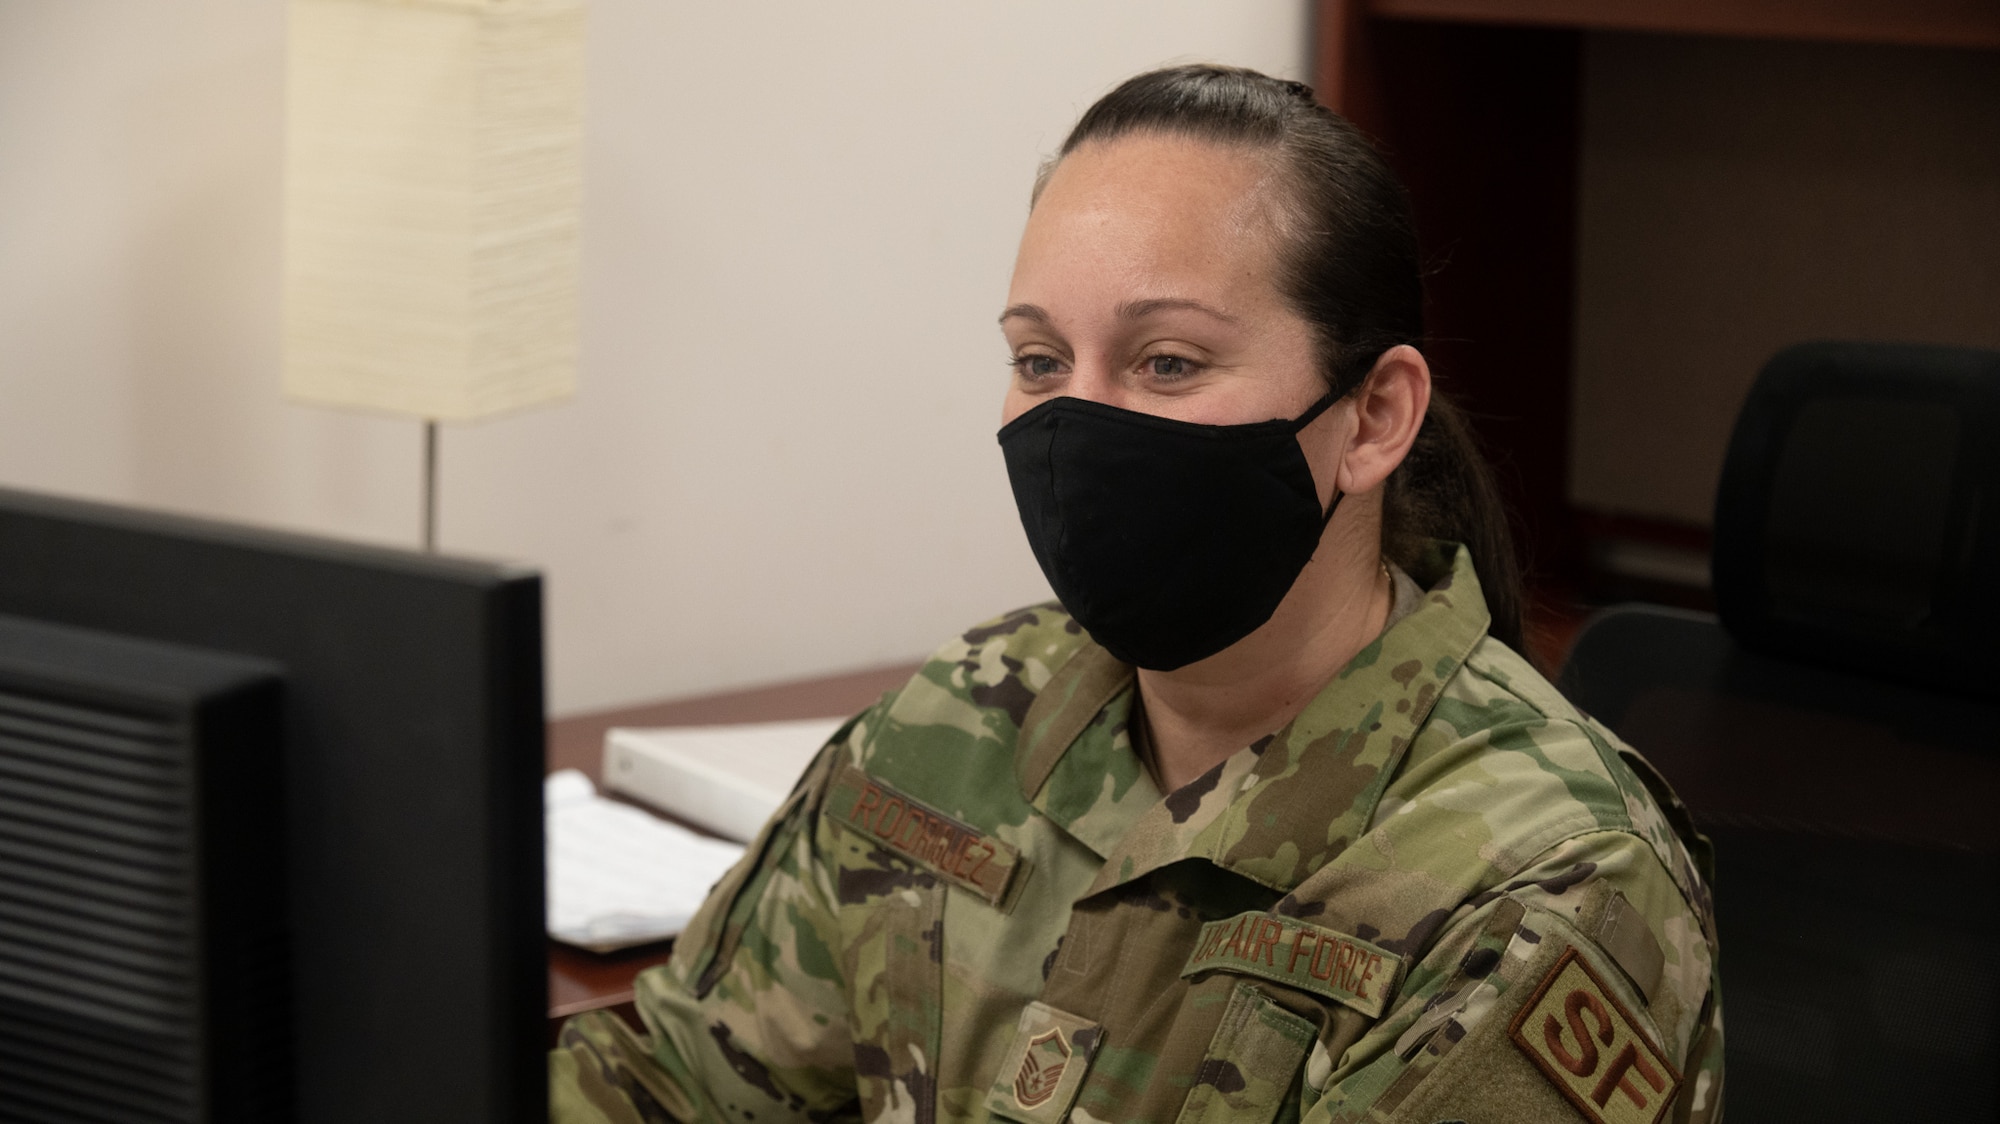 U.S. Air Force Master Sgt. Wanda Rodriguez, 175th Security Forces superintendent, sits at her desk in her office reviewing Air Force Instructions at Warfield Air National Guard Base at Martin State Airport, Middle River, Md., on March 5th, 2021.